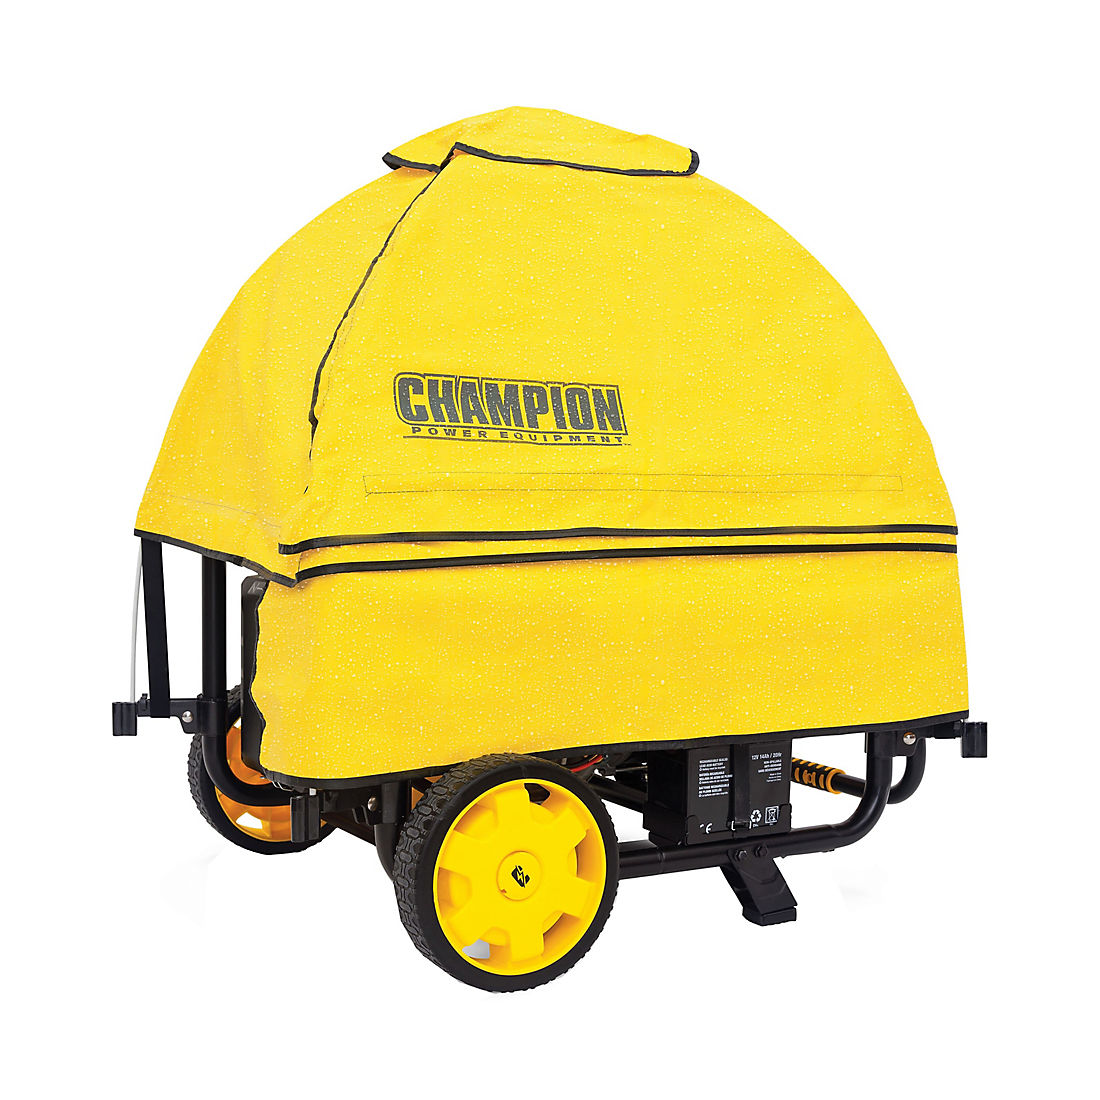 Champion Storm Shield Severe Weather Portable Generator Cover by GenTent for 3000 to 10,000-Watt Generators & olding Handle and Never-Flat Tires for Champion 2800 to 4750-Watt Generators 